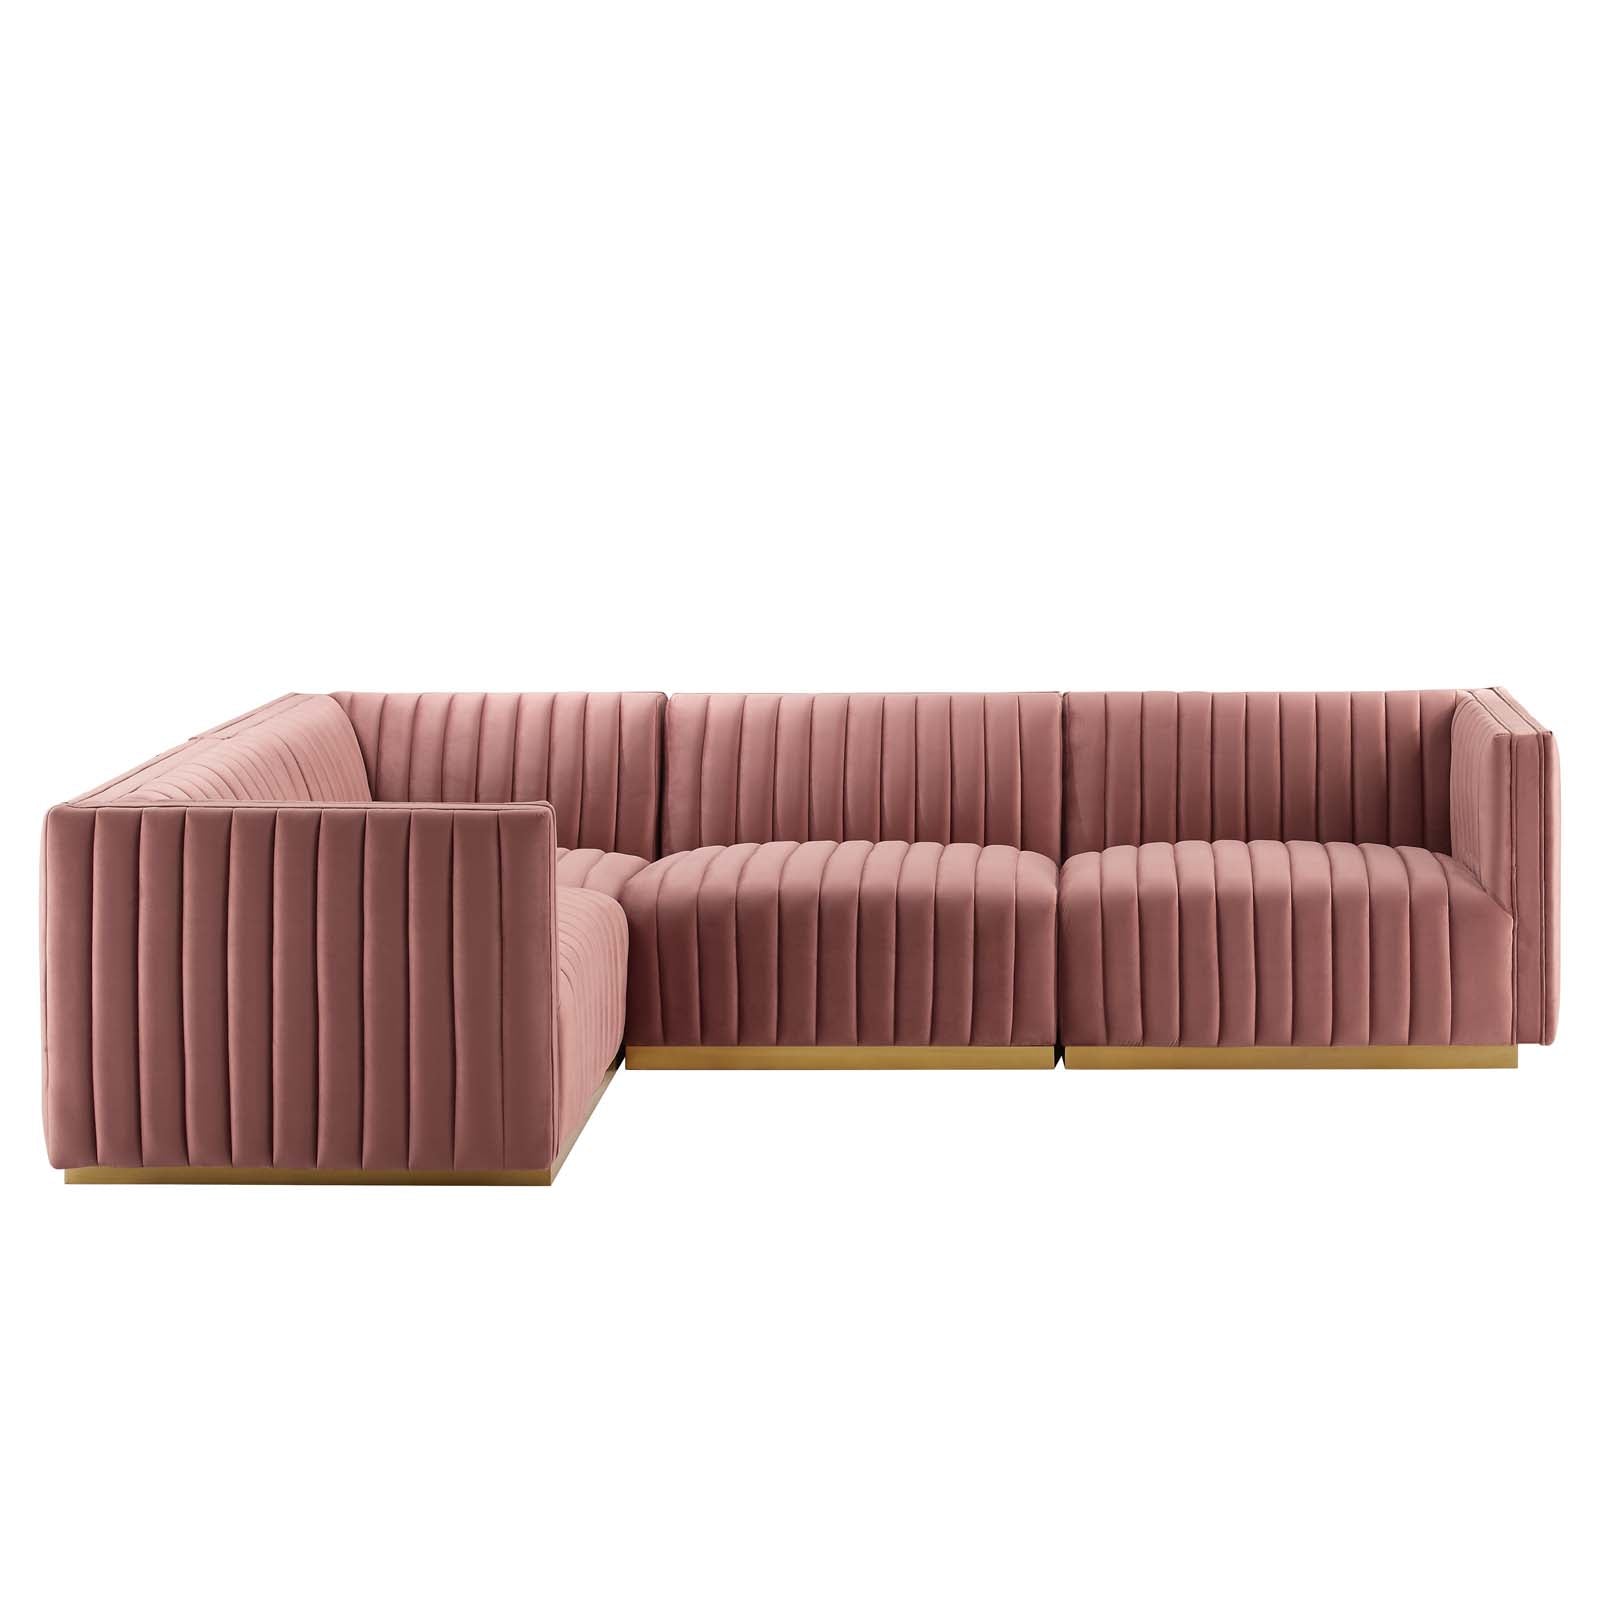 Modway Sectional Sofas - Conjure Tufted Performance Velvet 4 Piece Sectional Gold | Dusty Rose